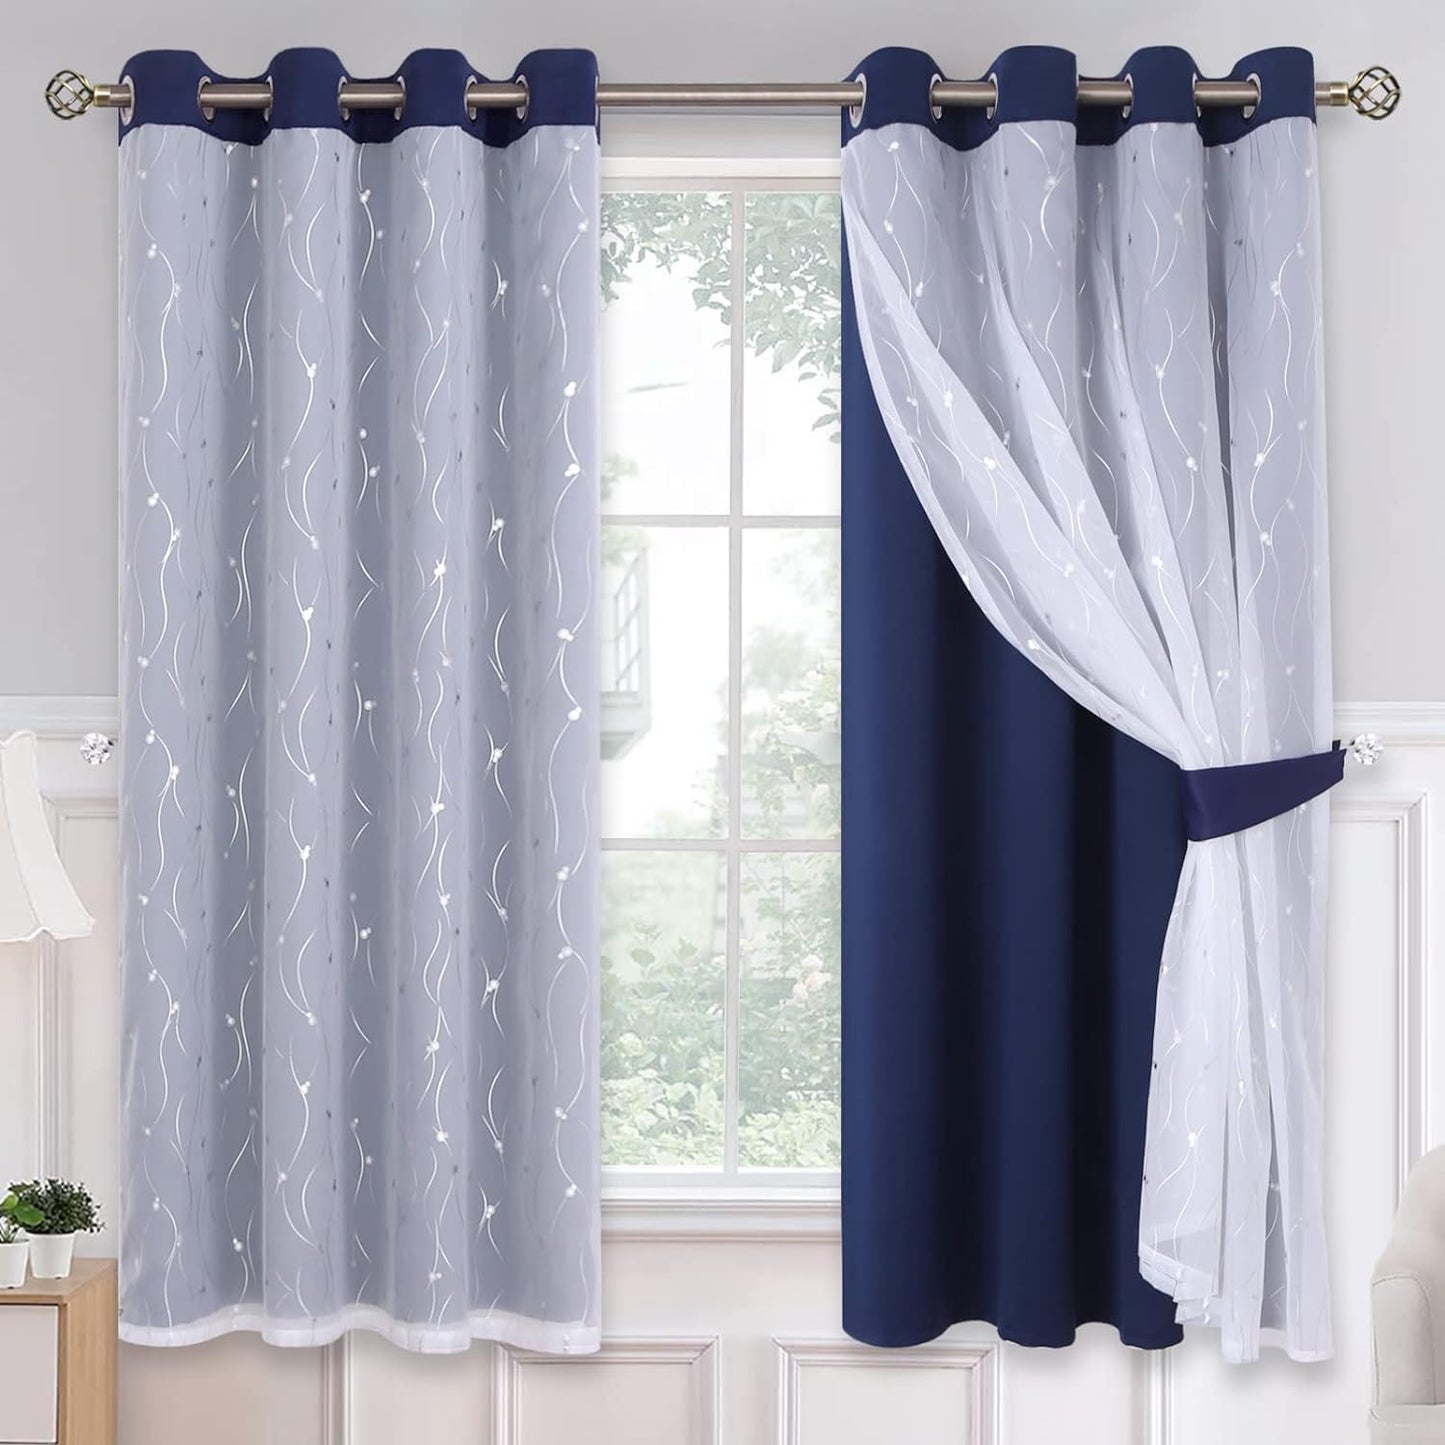 Bgment Grey Blackout Curtains with Sheer Overlay 84 Inches Long，Double Layer Silver Printed Kids Curtains Grommet Thermal Insulated Window Drapes for Living Room, 2 Panel, 52 X 84, Dark Grey  BGment Navy Blue 52W X 63L 